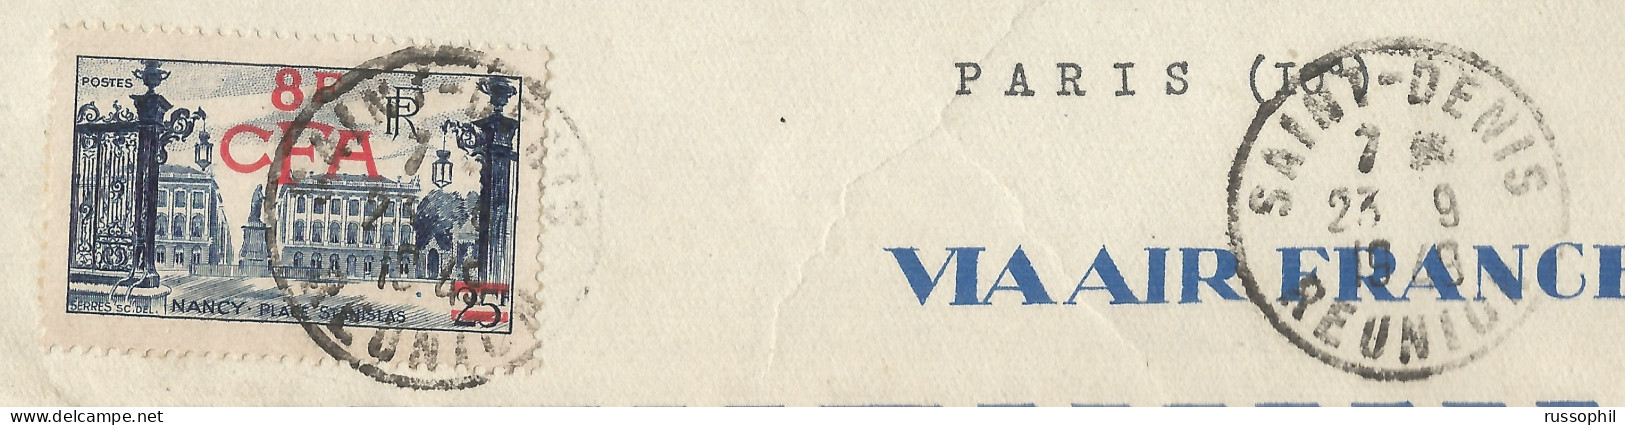 REUNION - OVERCHARGED 8 F CFA STAMP FRANKING COMMERCIAL AIR COVER FROM SAINT DENIS TO MAINLAND FRANCE - 1949 - Covers & Documents